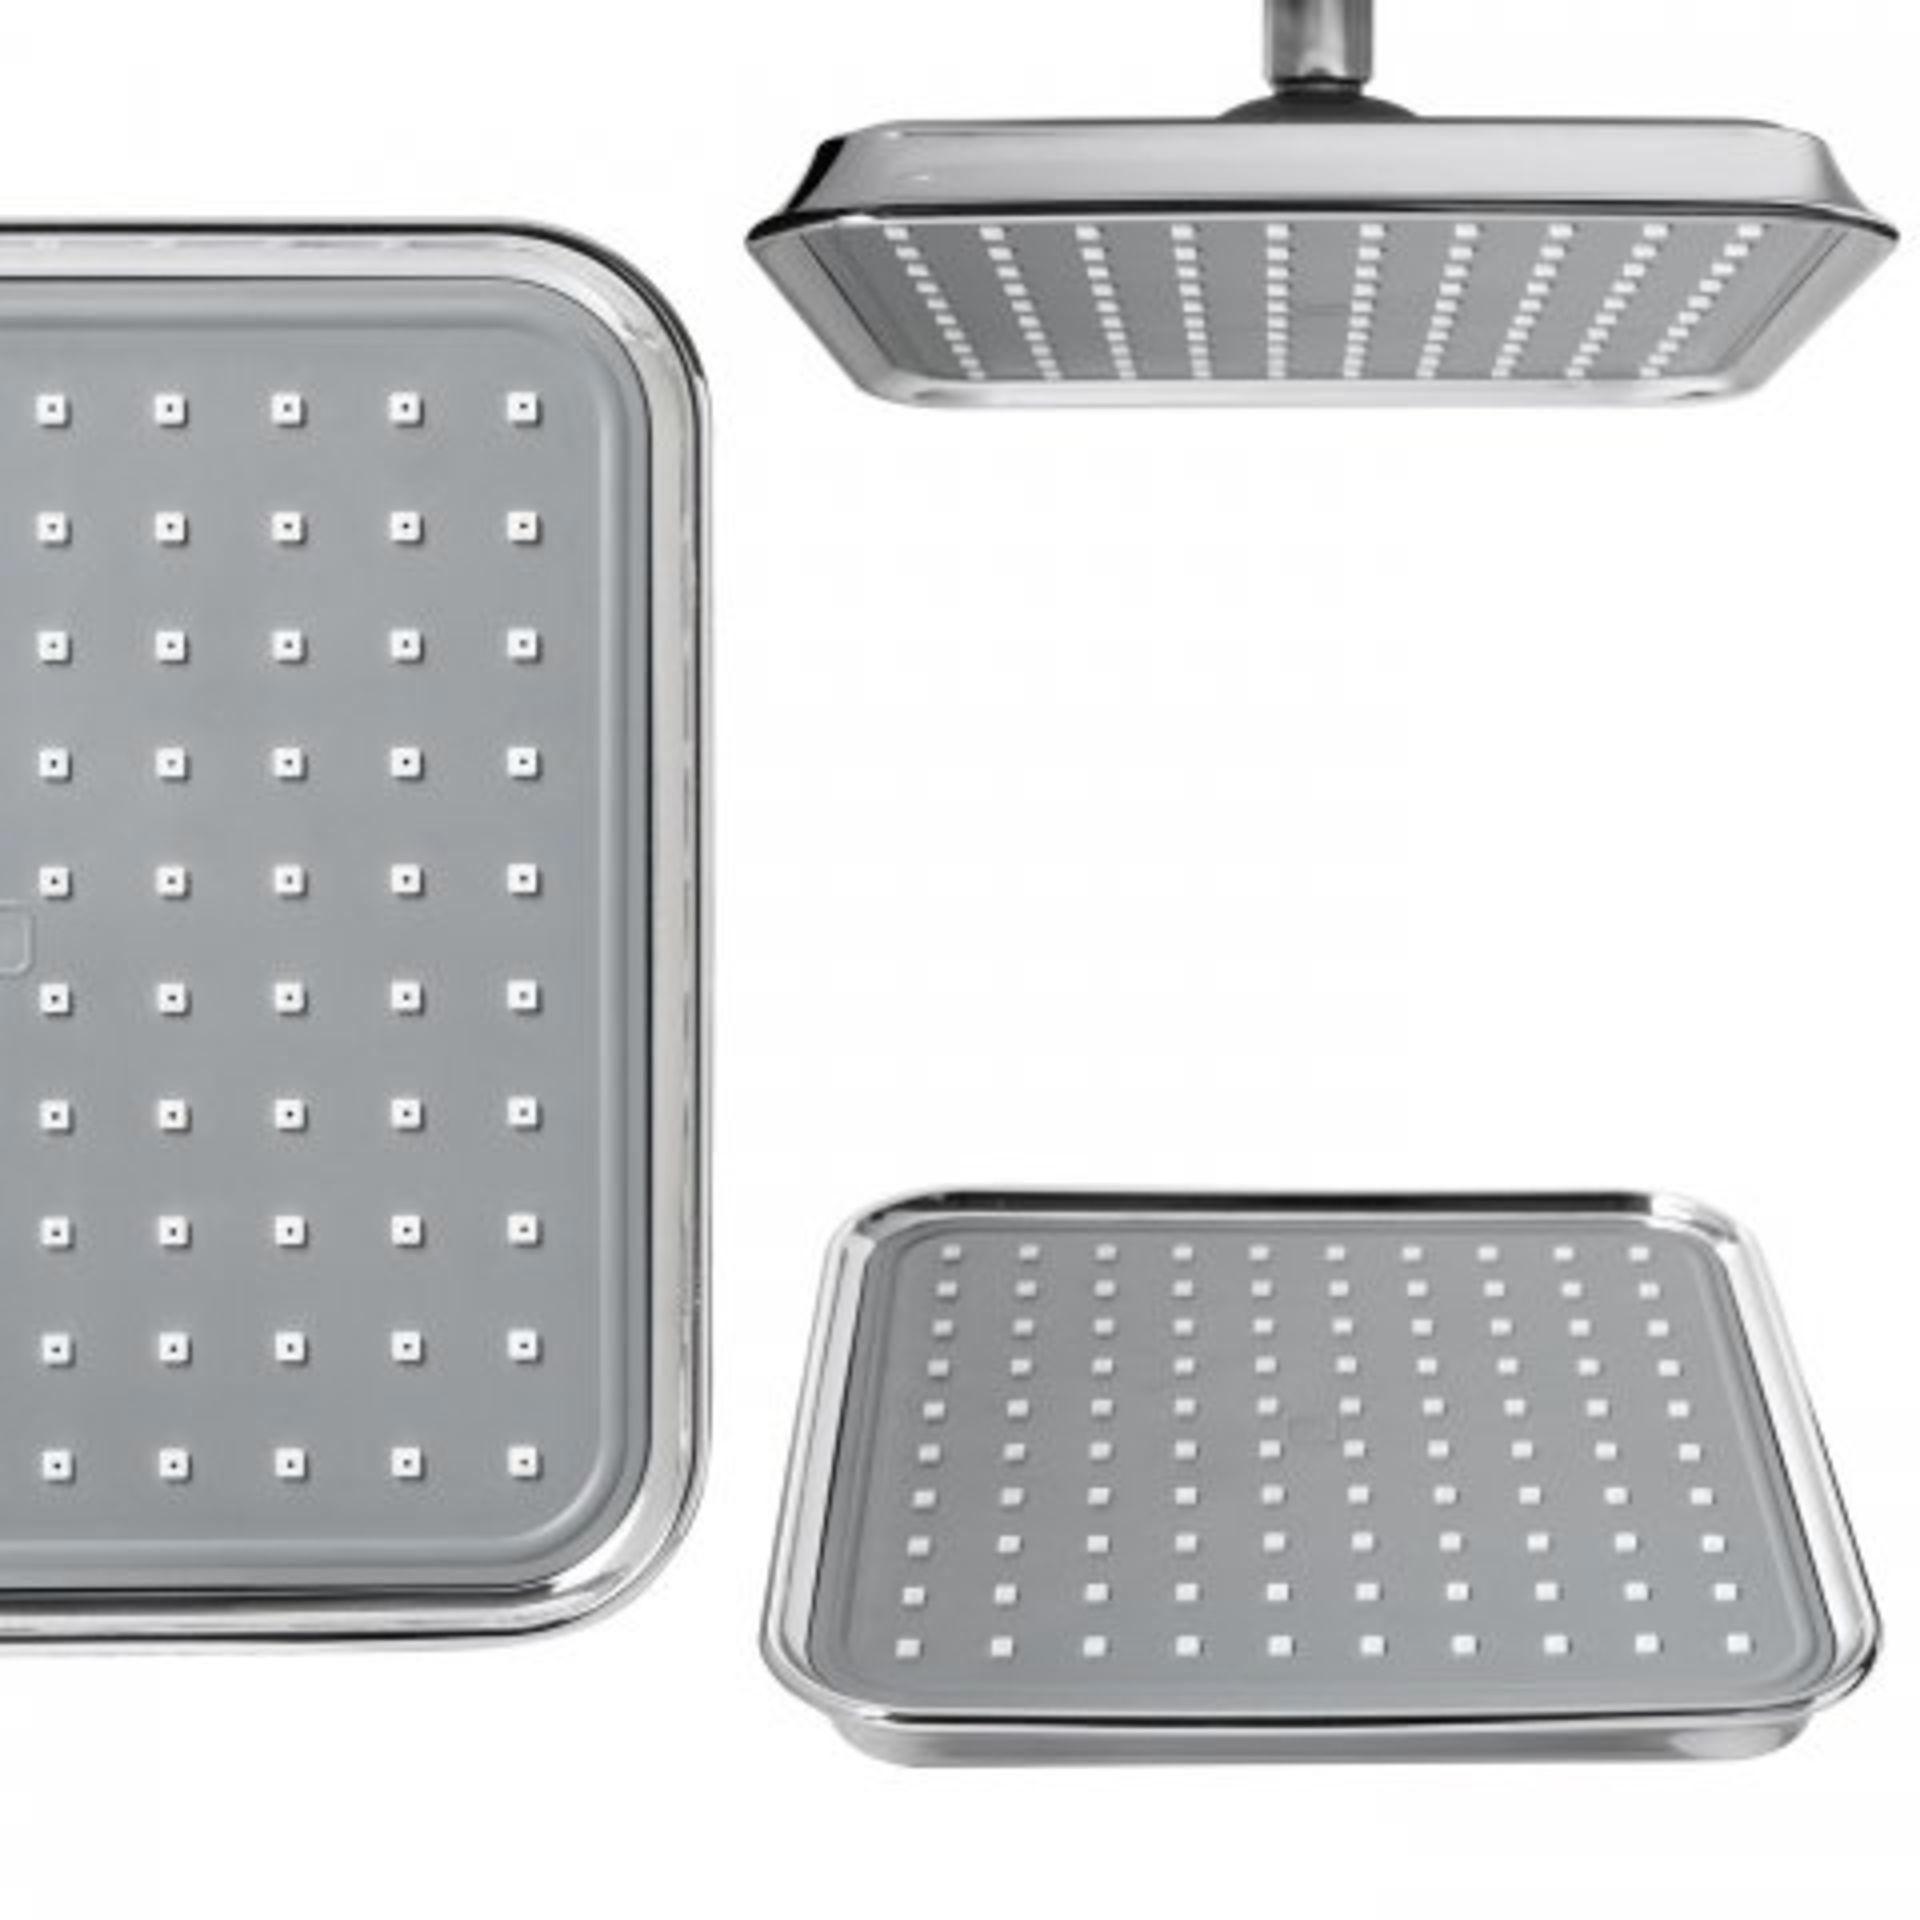 (L75) Square Concealed Thermostatic Mixer Shower & Medium Shower Head. RRP £349.99. Smart edges, - Image 3 of 7